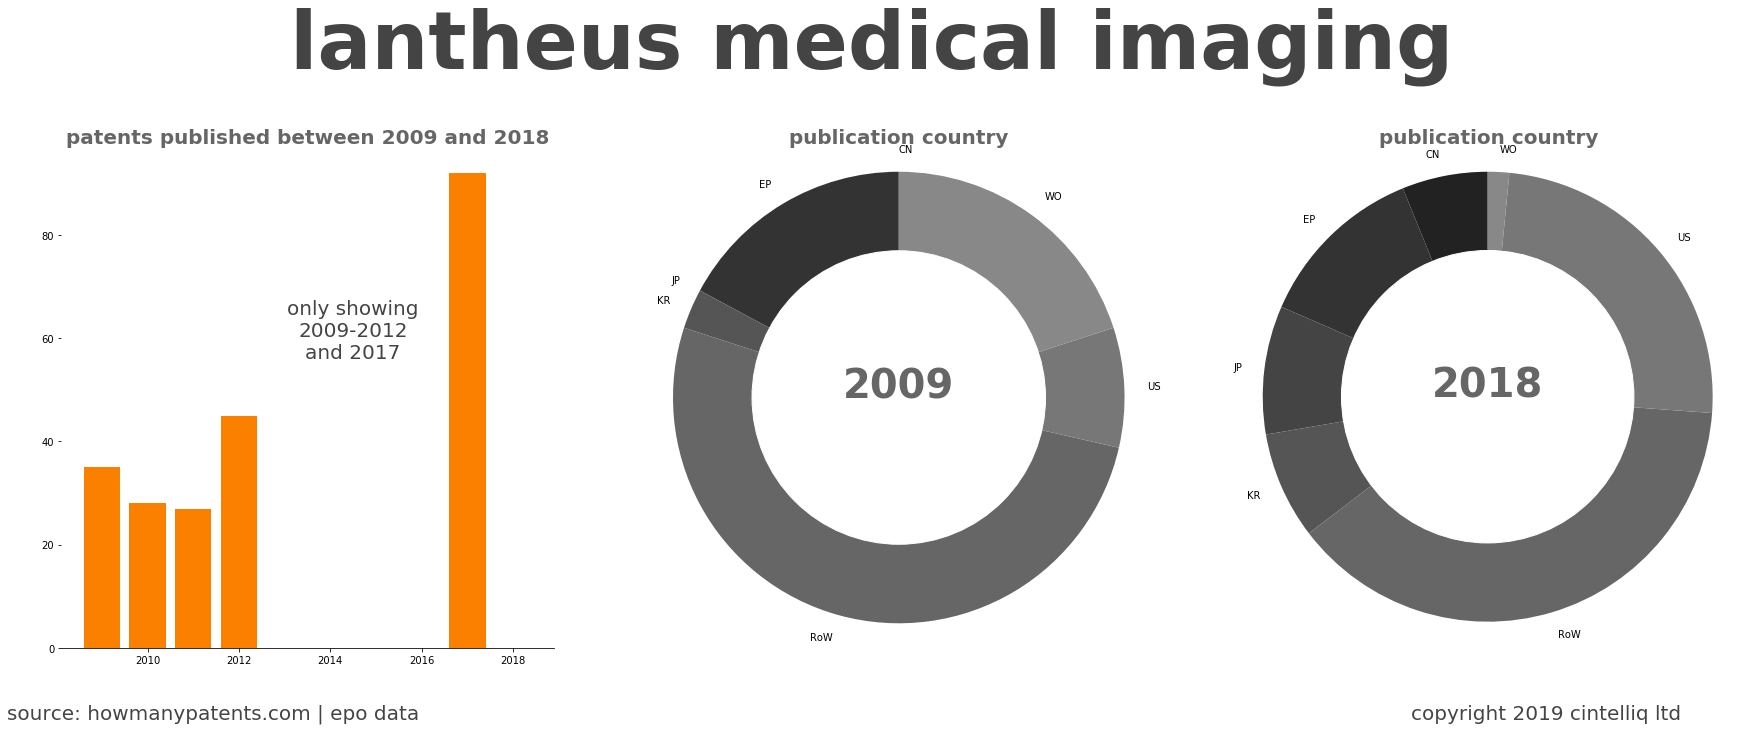 summary of patents for Lantheus Medical Imaging